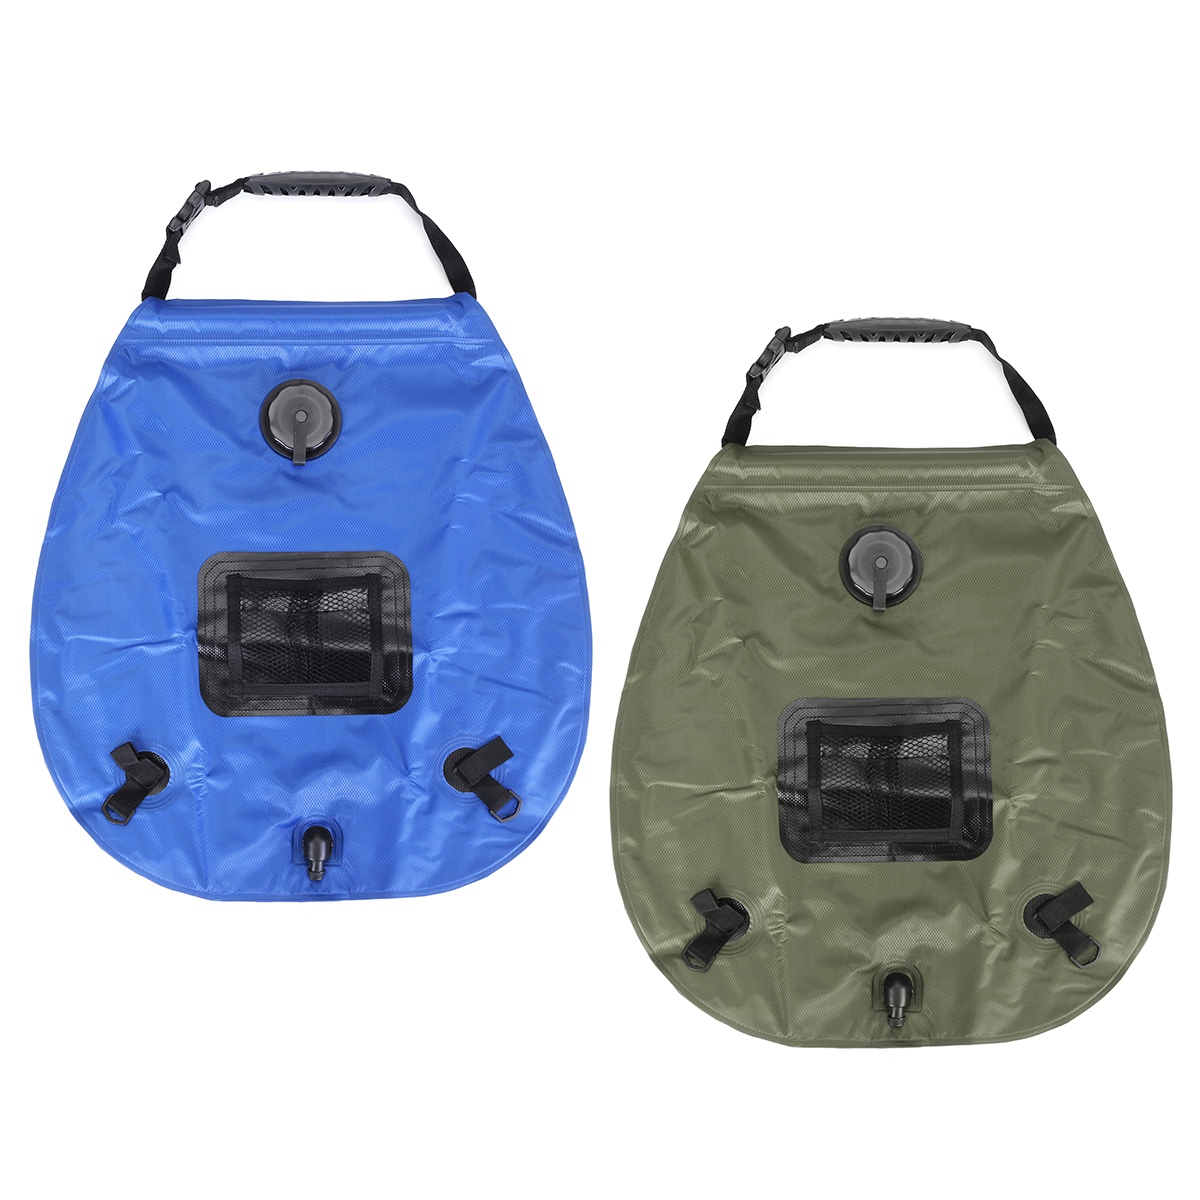 20L-Foldable-Portable-Water-Shower-Bathing-Bag-Solar-Energy-Heated-PVC-Outdoor-Travel-Camping-1724741-10